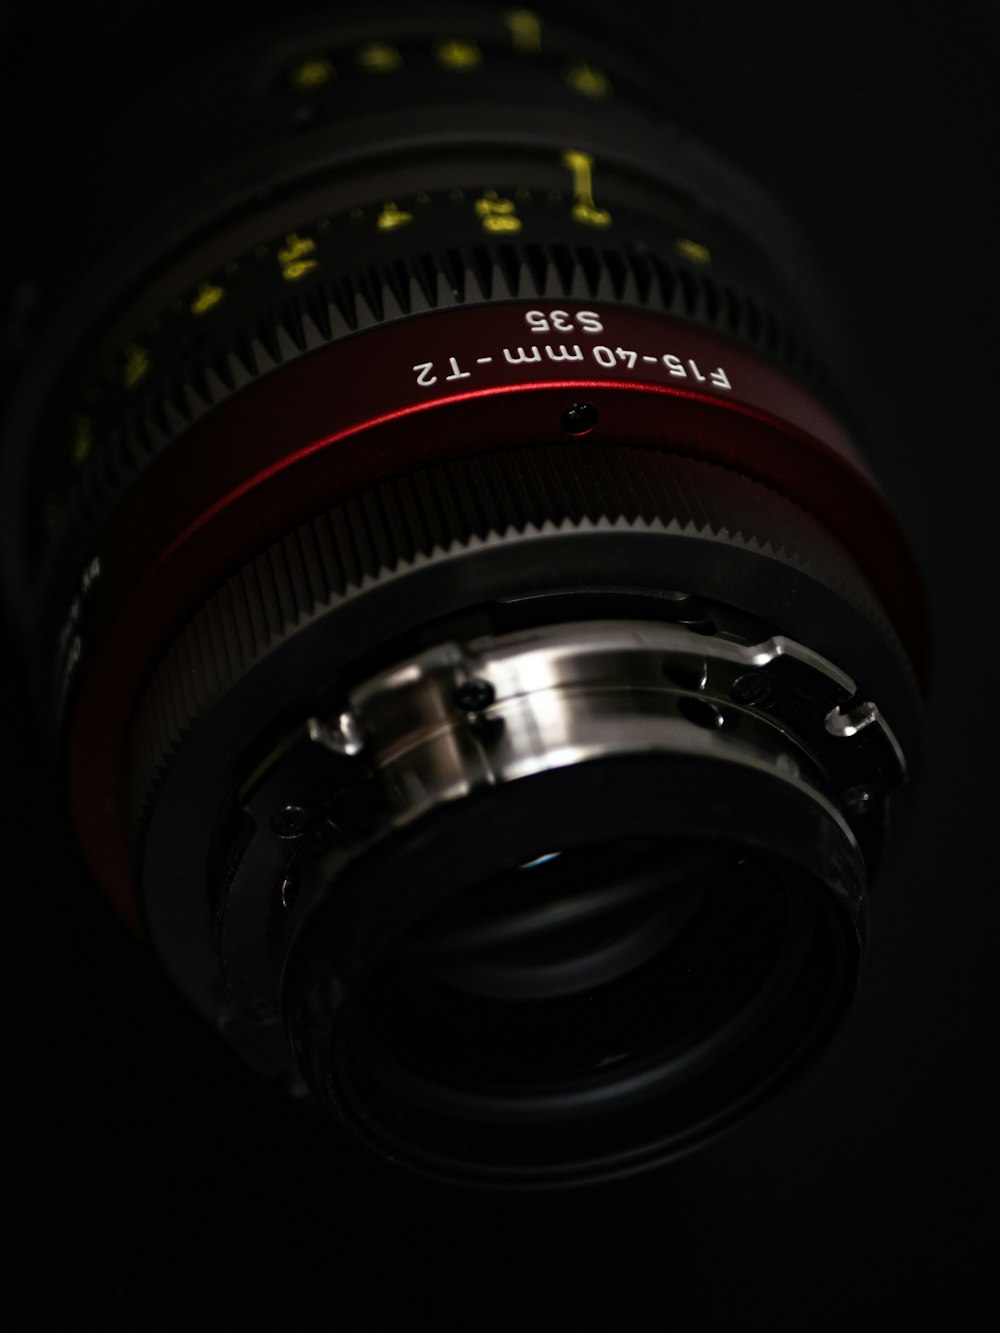 black and red camera lens